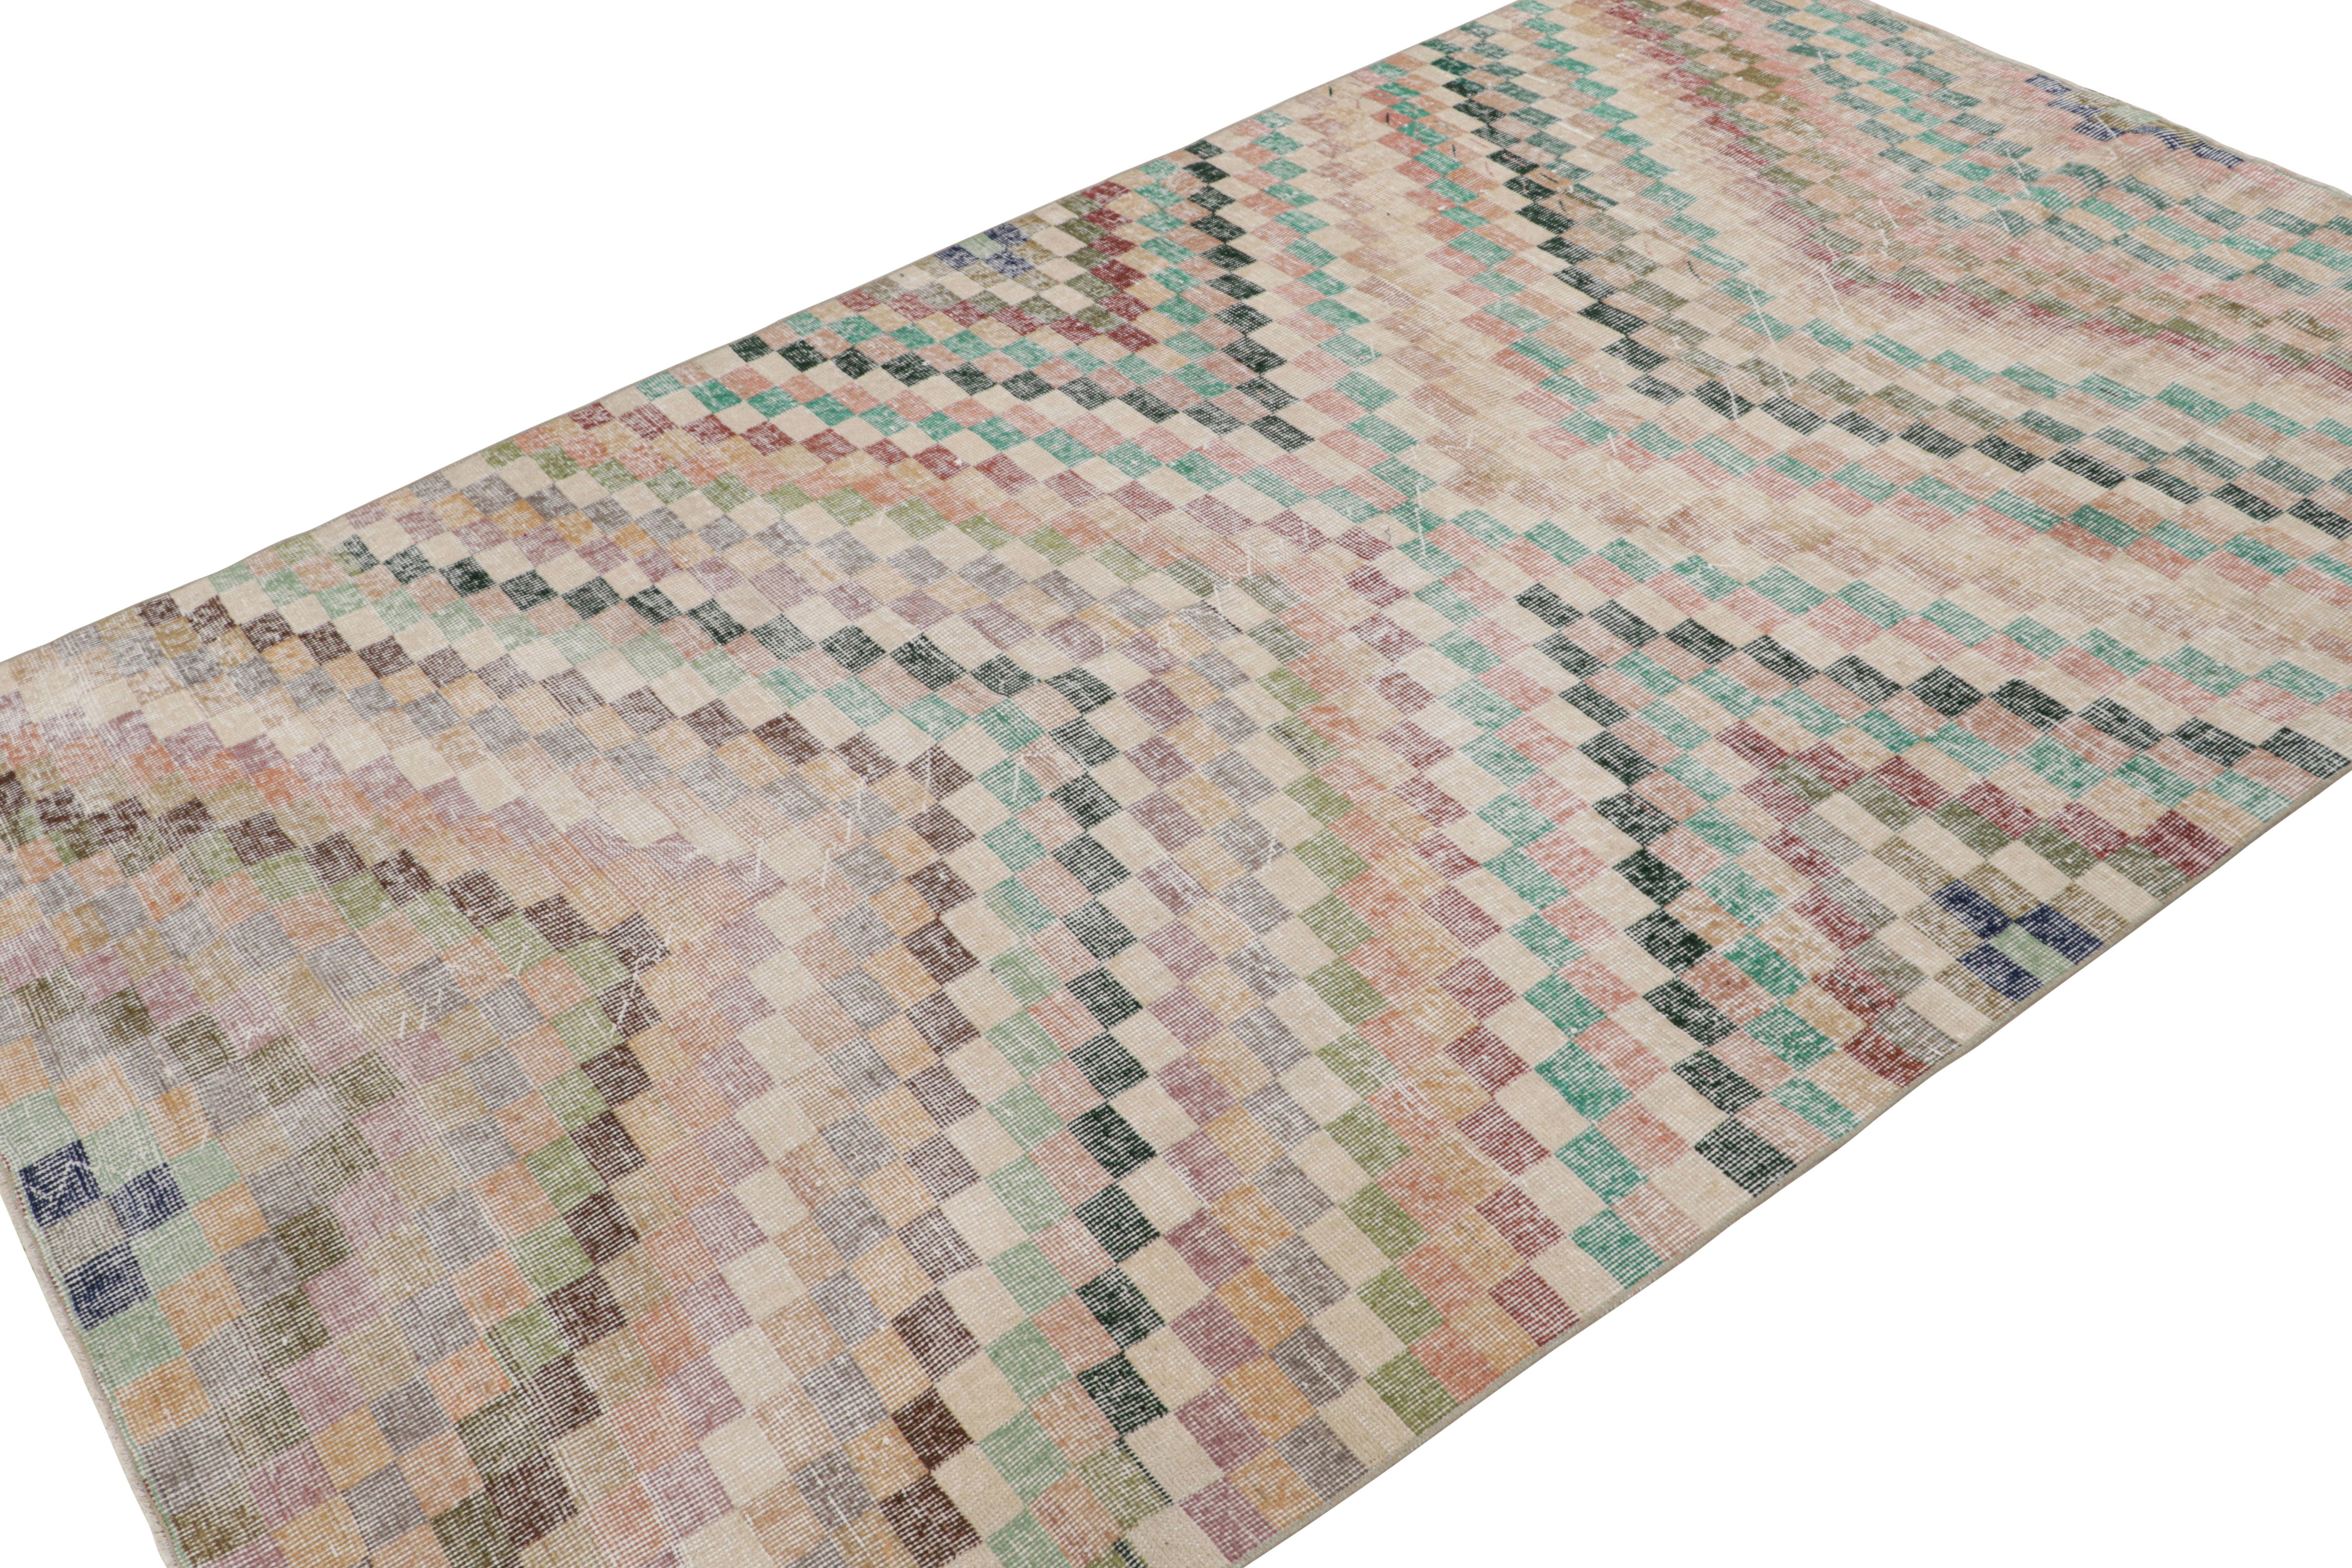 Handknotted in wool, this 5x9 vintage rug originates from Turkey, circa 1960-1970 and is believed to hail from the Turkish artist Zeki Muren. 

On the Design:

Keen eyes will note polychromatic colorways of pastel and jewel tones underscoring a